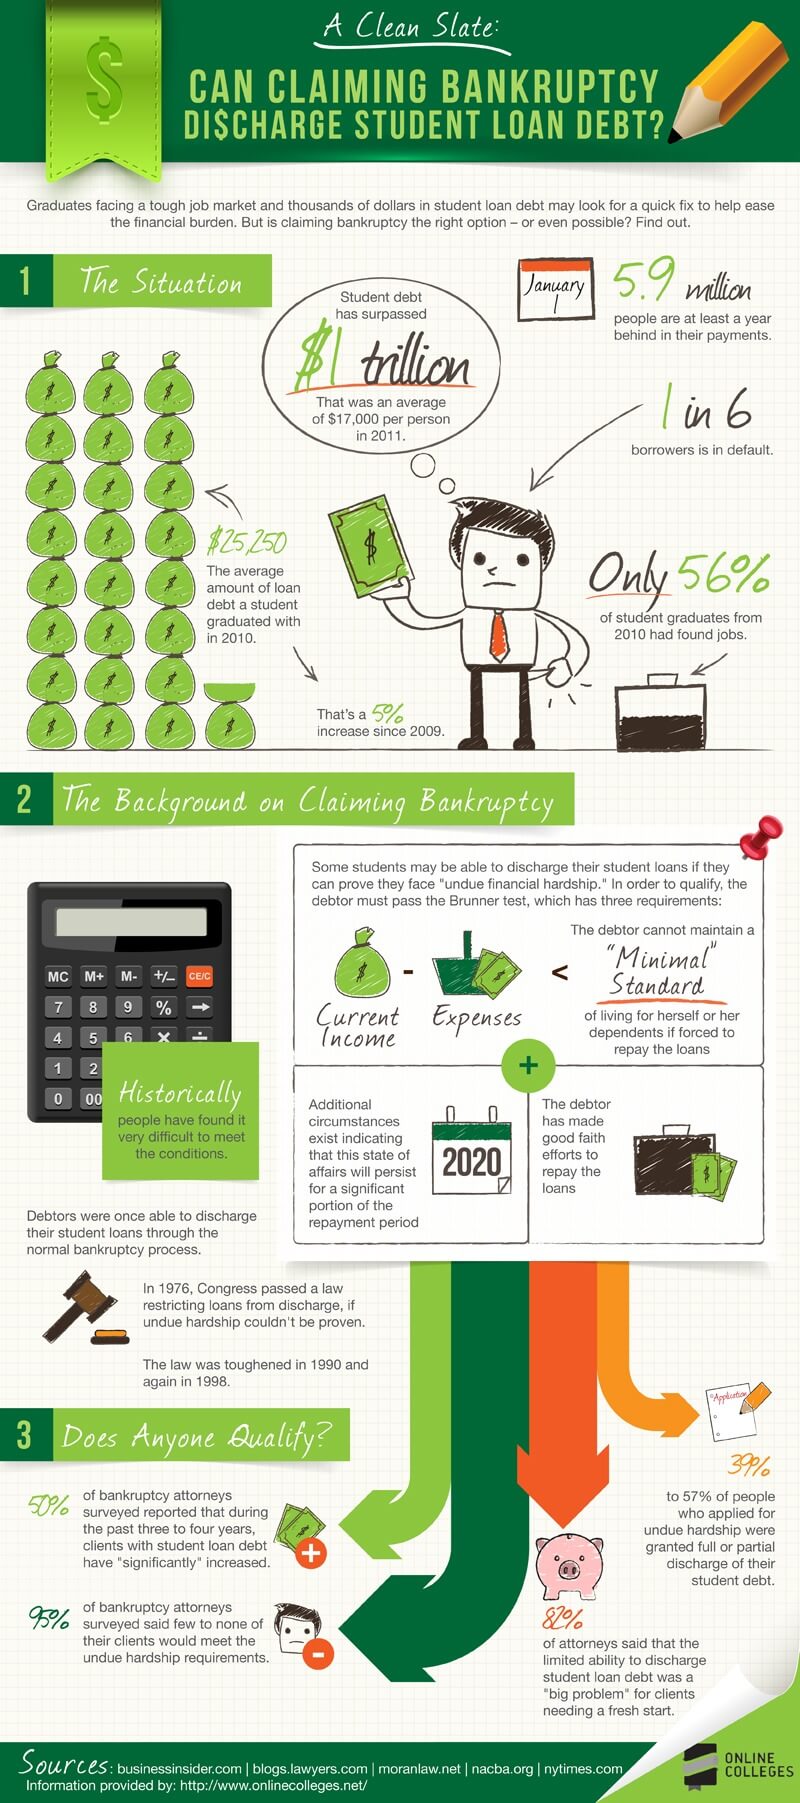 Bankruptcy Discharge Student Loan Debt infographic